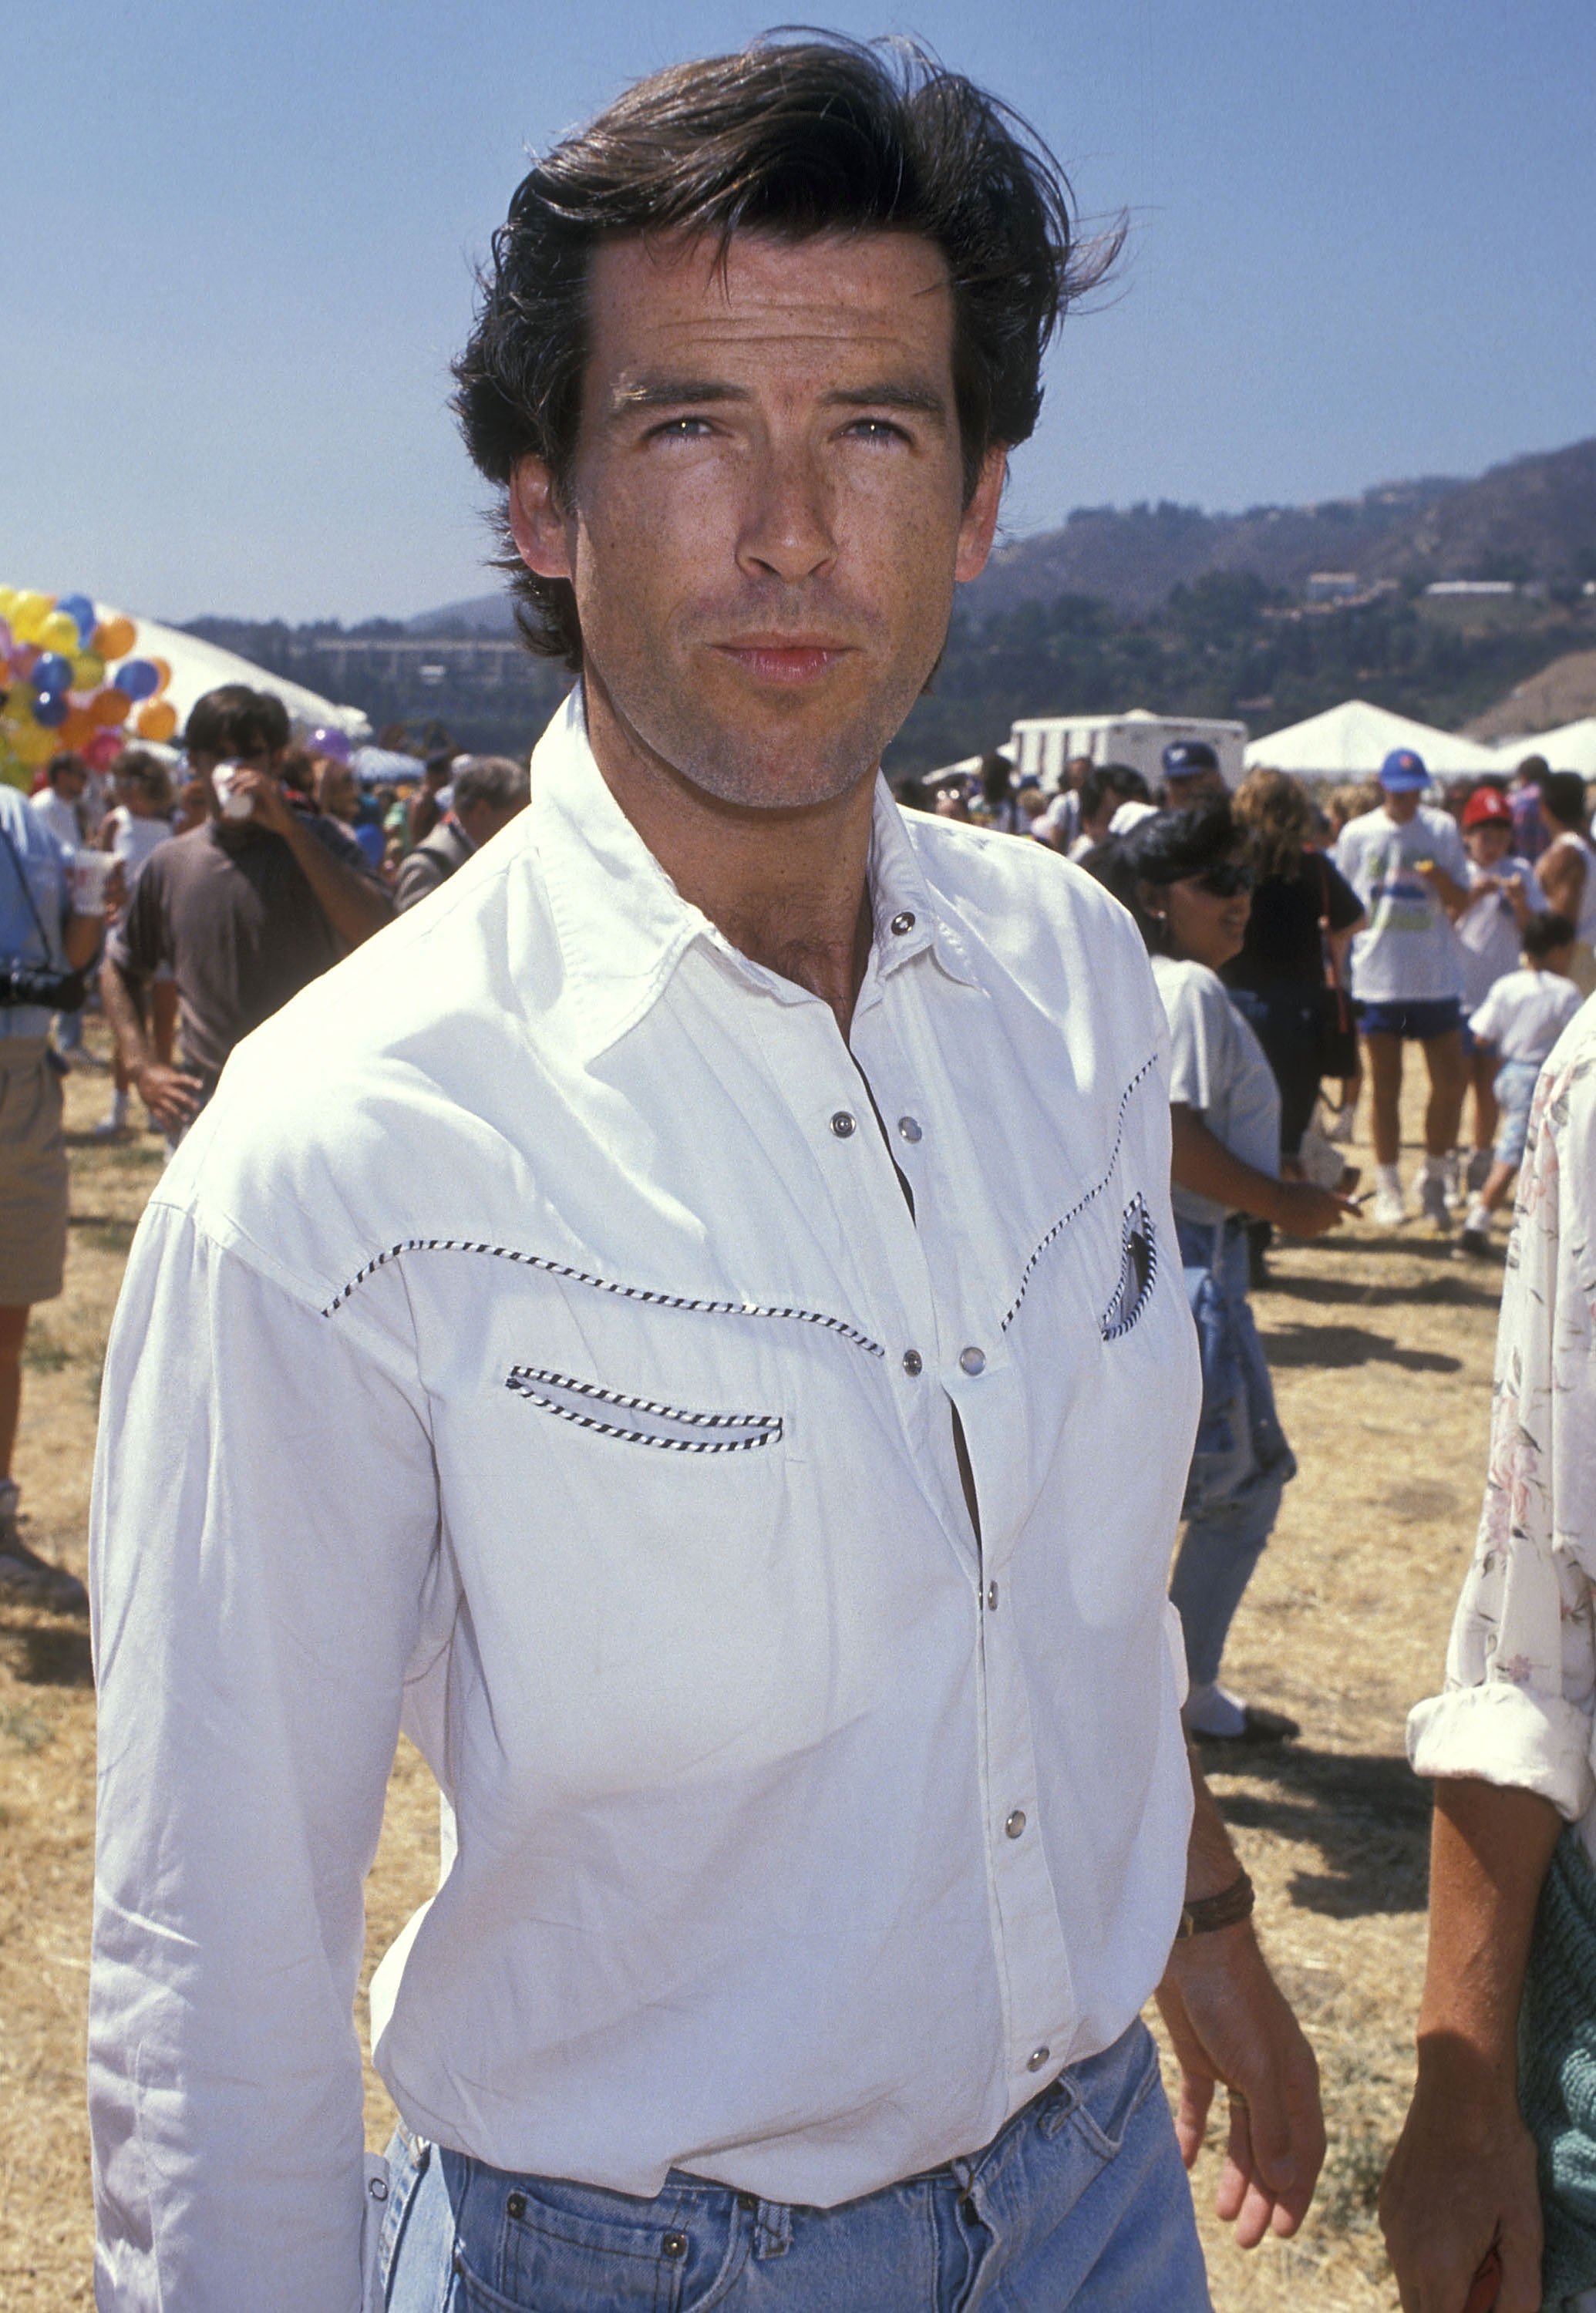 Pierce Brosnan at the Civic Center Area in Malibu, California, United States, 2nd September 1989 | Source: Getty Images